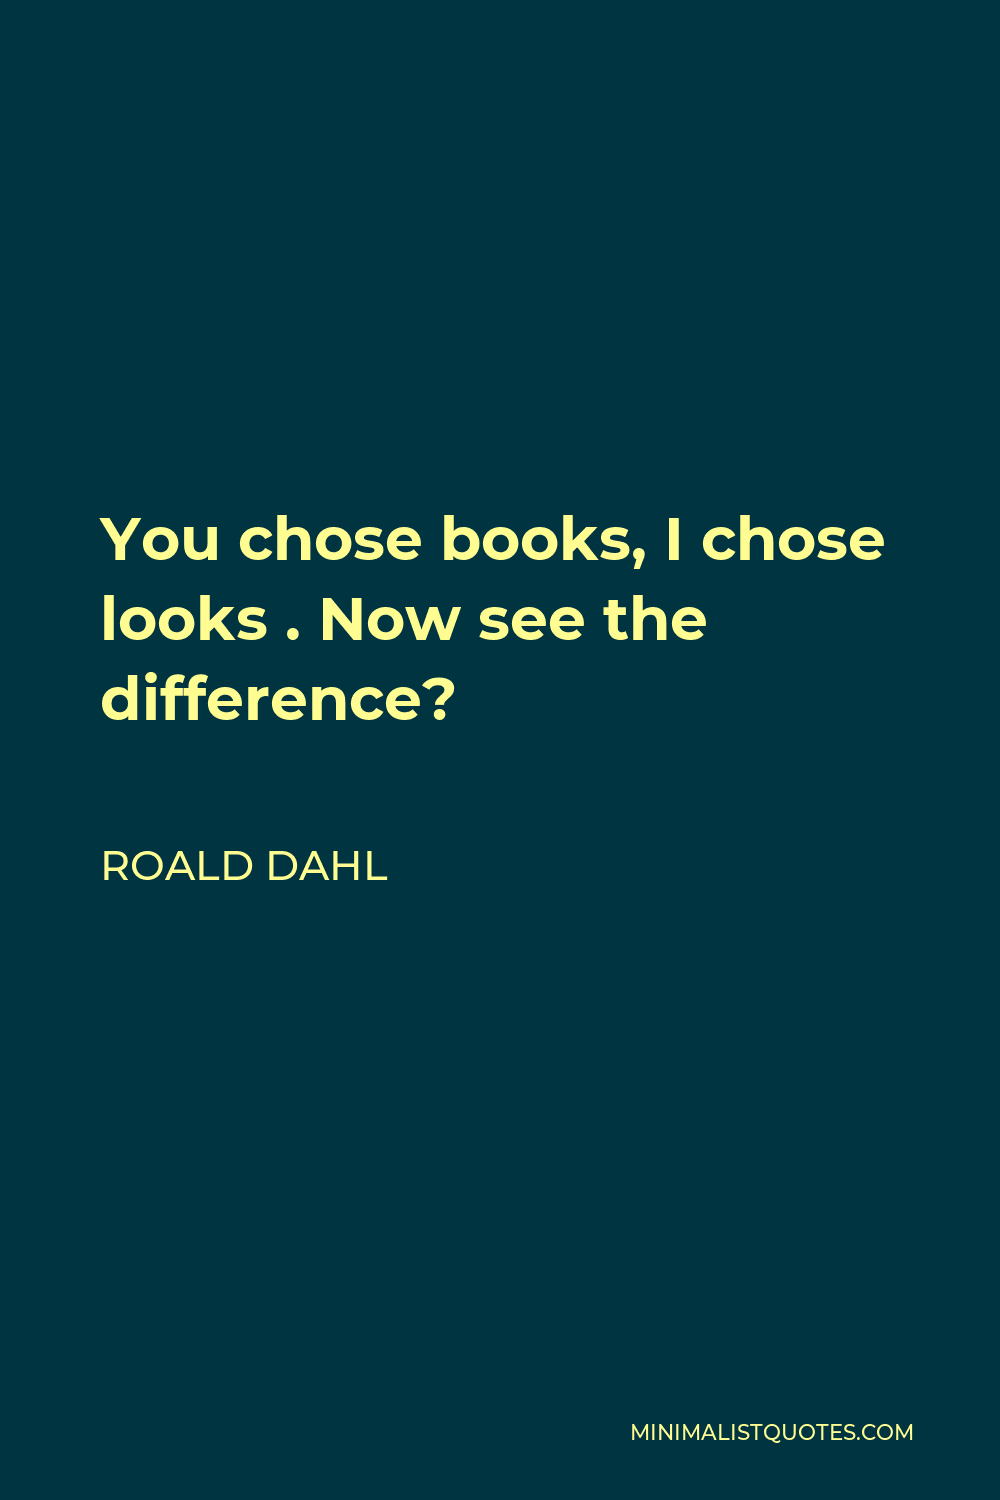 Roald Dahl Quote - You chose books, I chose looks . Now see the difference?